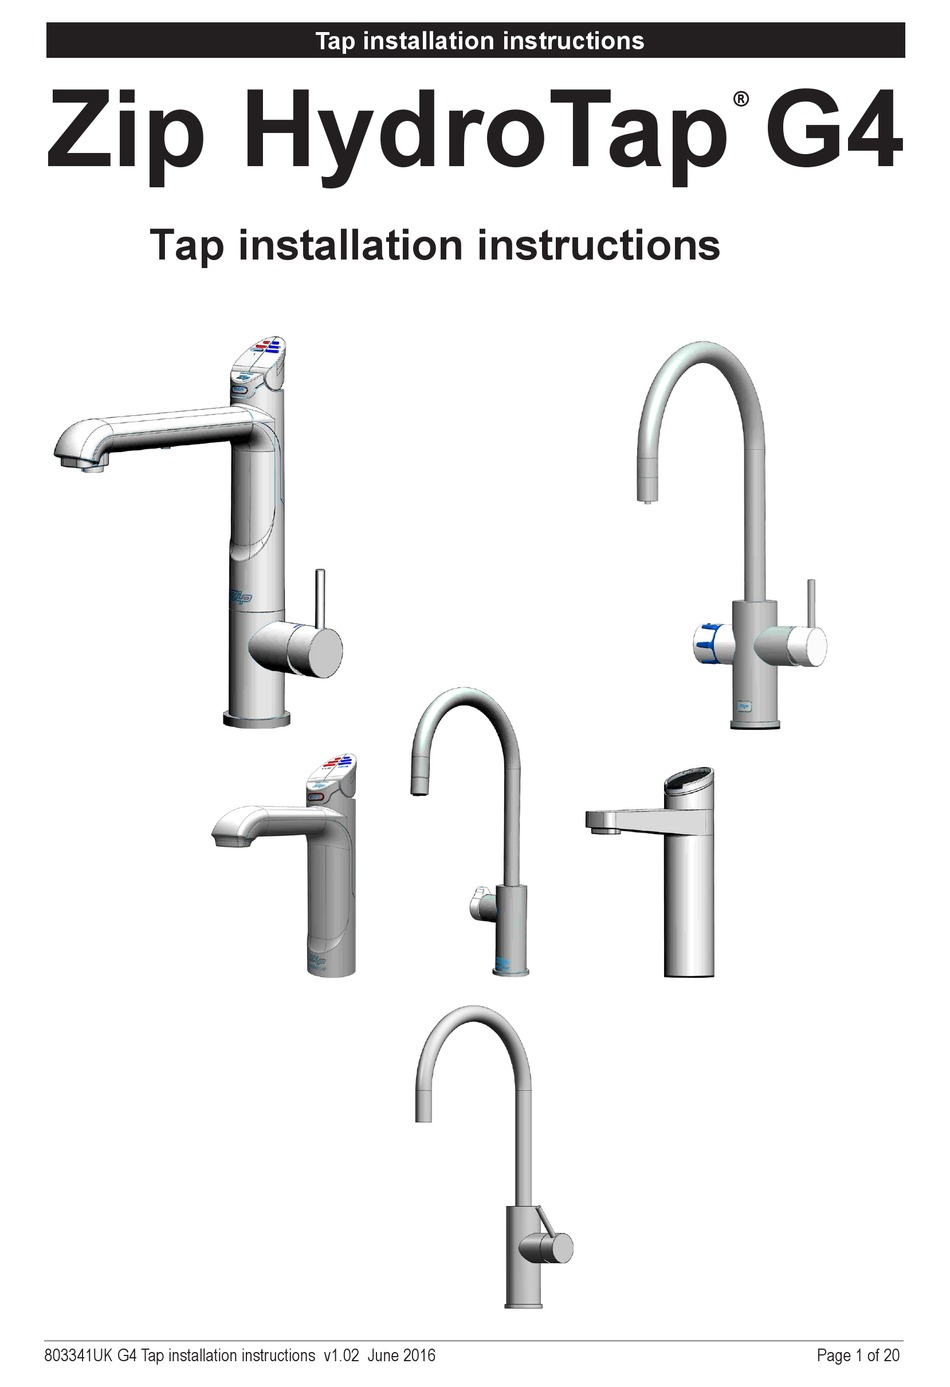 zip-hydrotap-g4-series-installation-instructions-manual-pdf-download